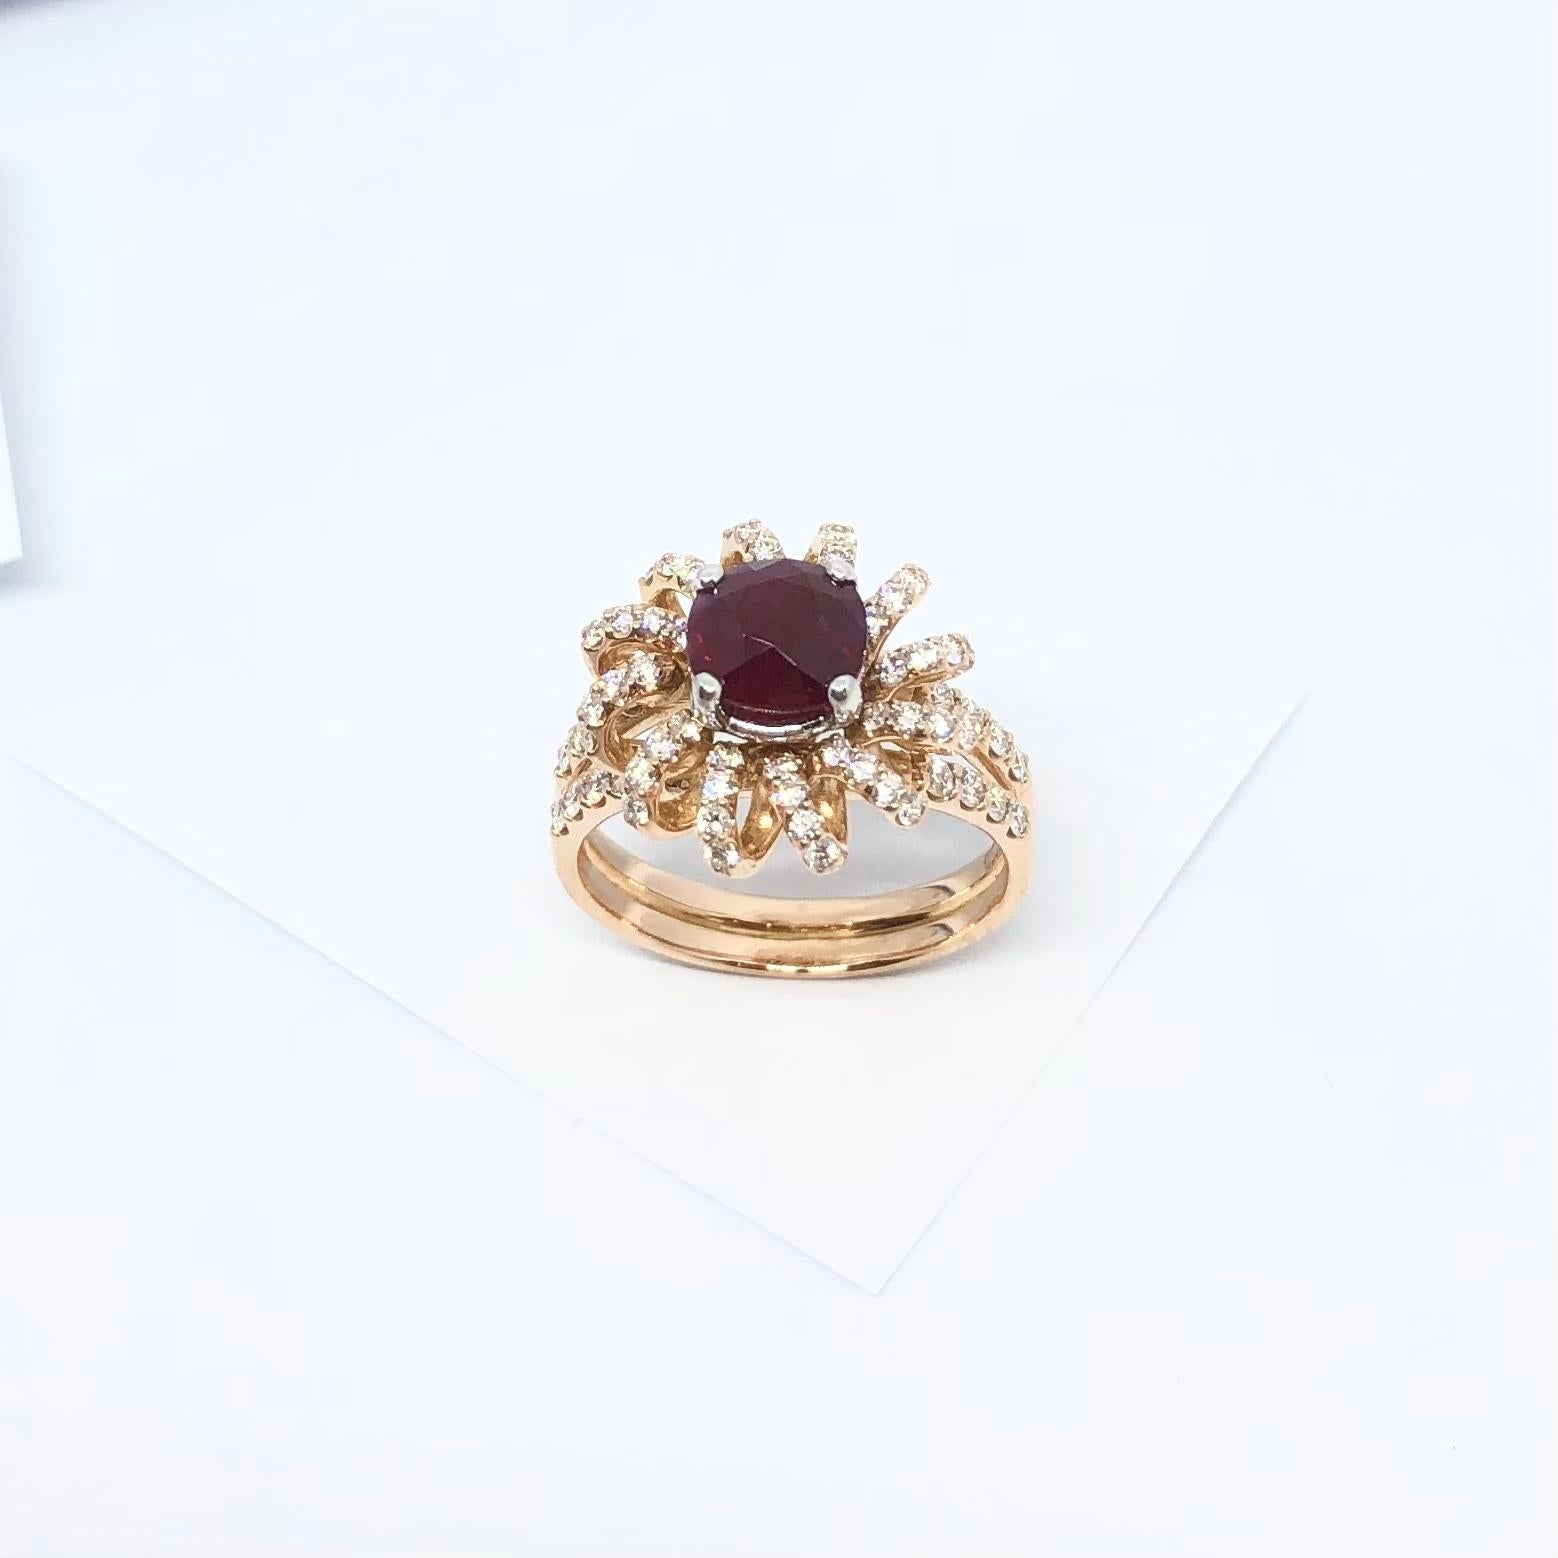 Certified Burmese Pigeon's Blood Ruby with Diamond Ring Set in 18K Rose Gold For Sale 1